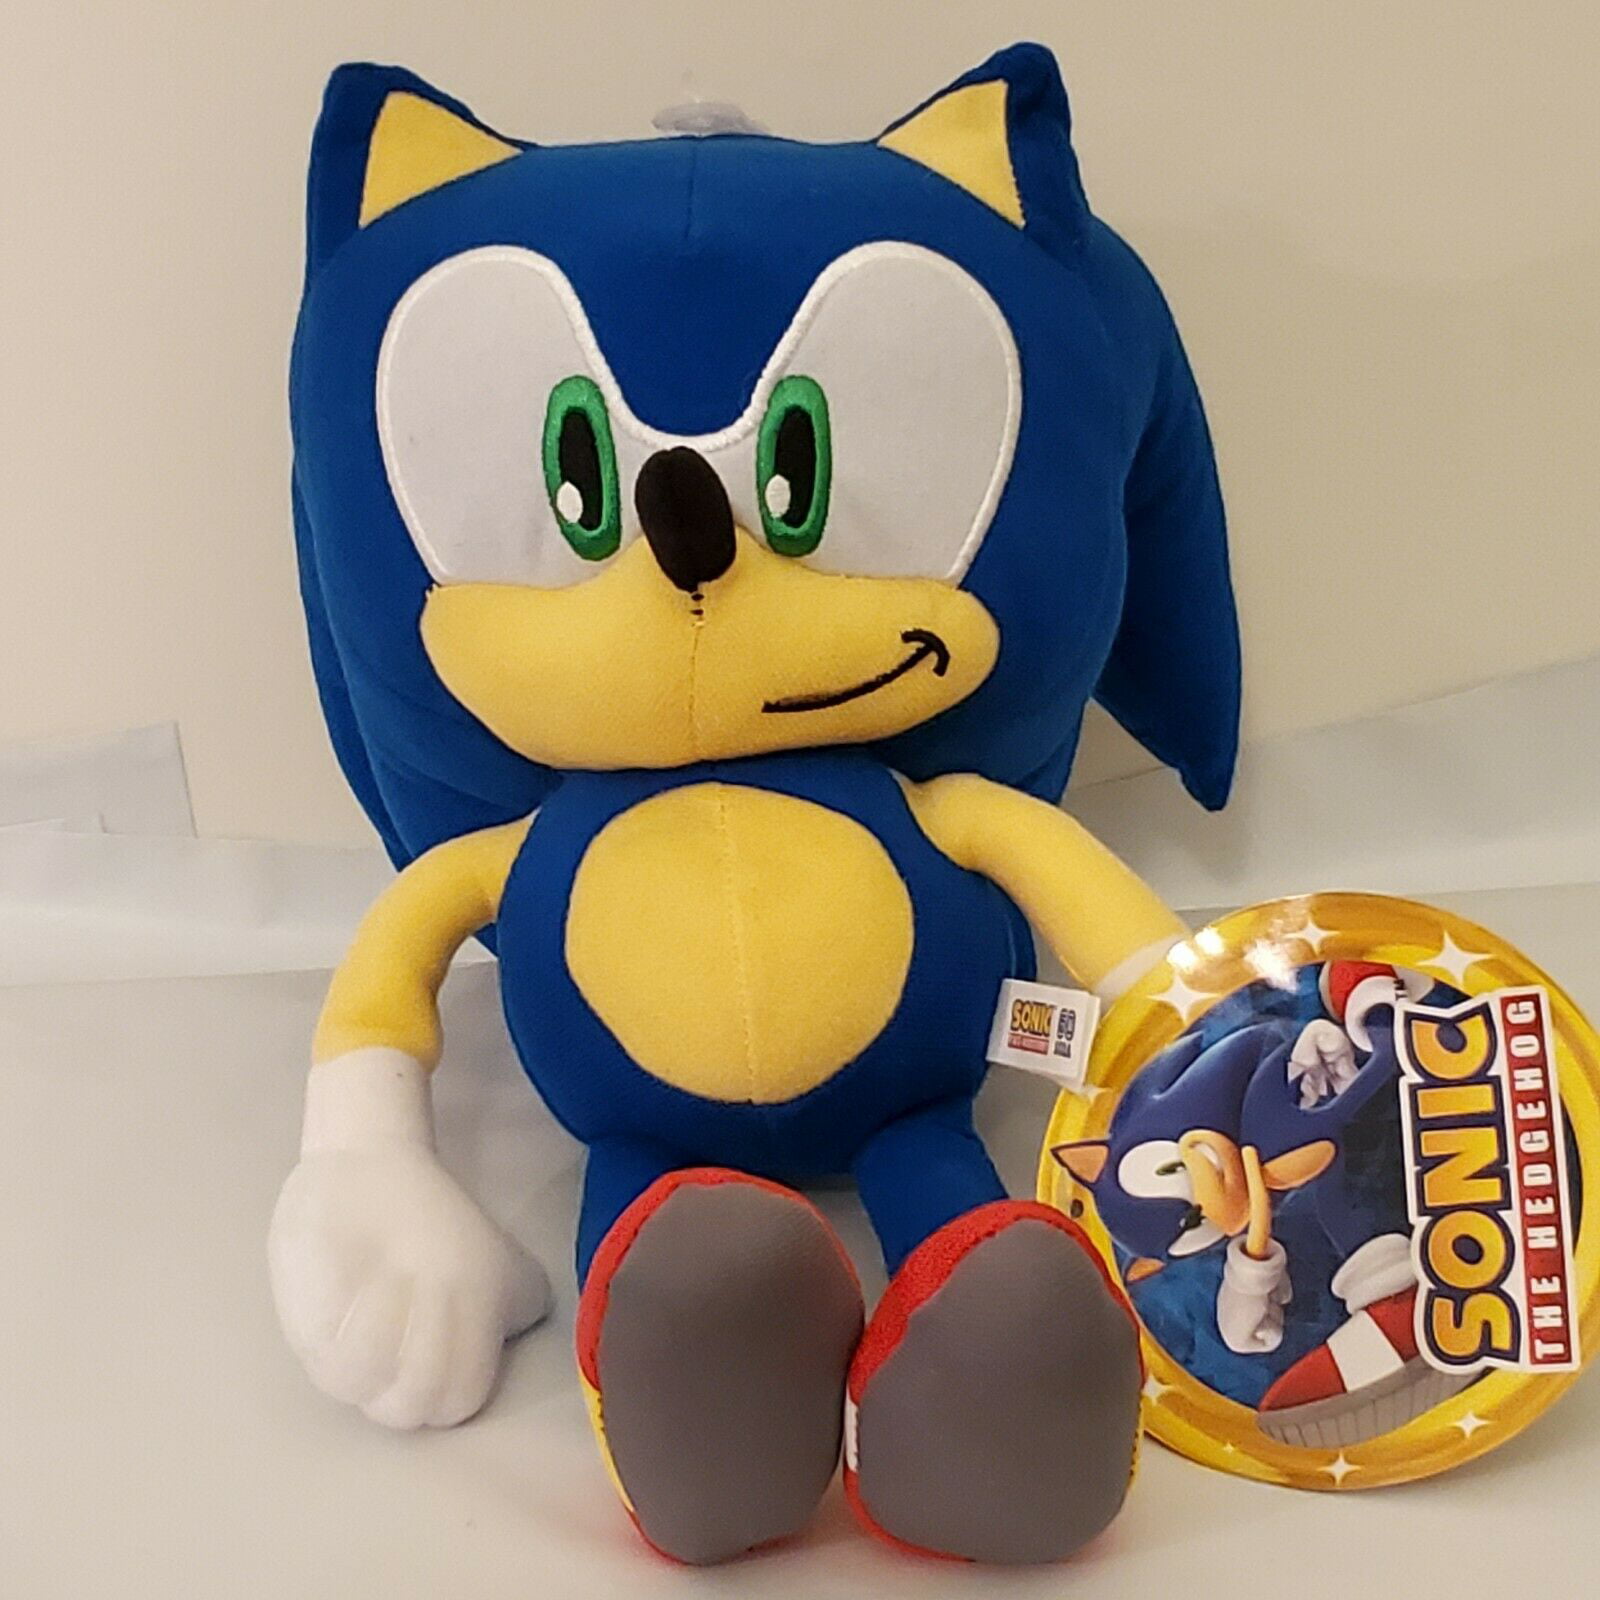 AUTHENTIC LARGE 12" INCH SEGA SONIC THE HEDGEHOG TAILS SHADOW KNUCKLES PLUSH SET 